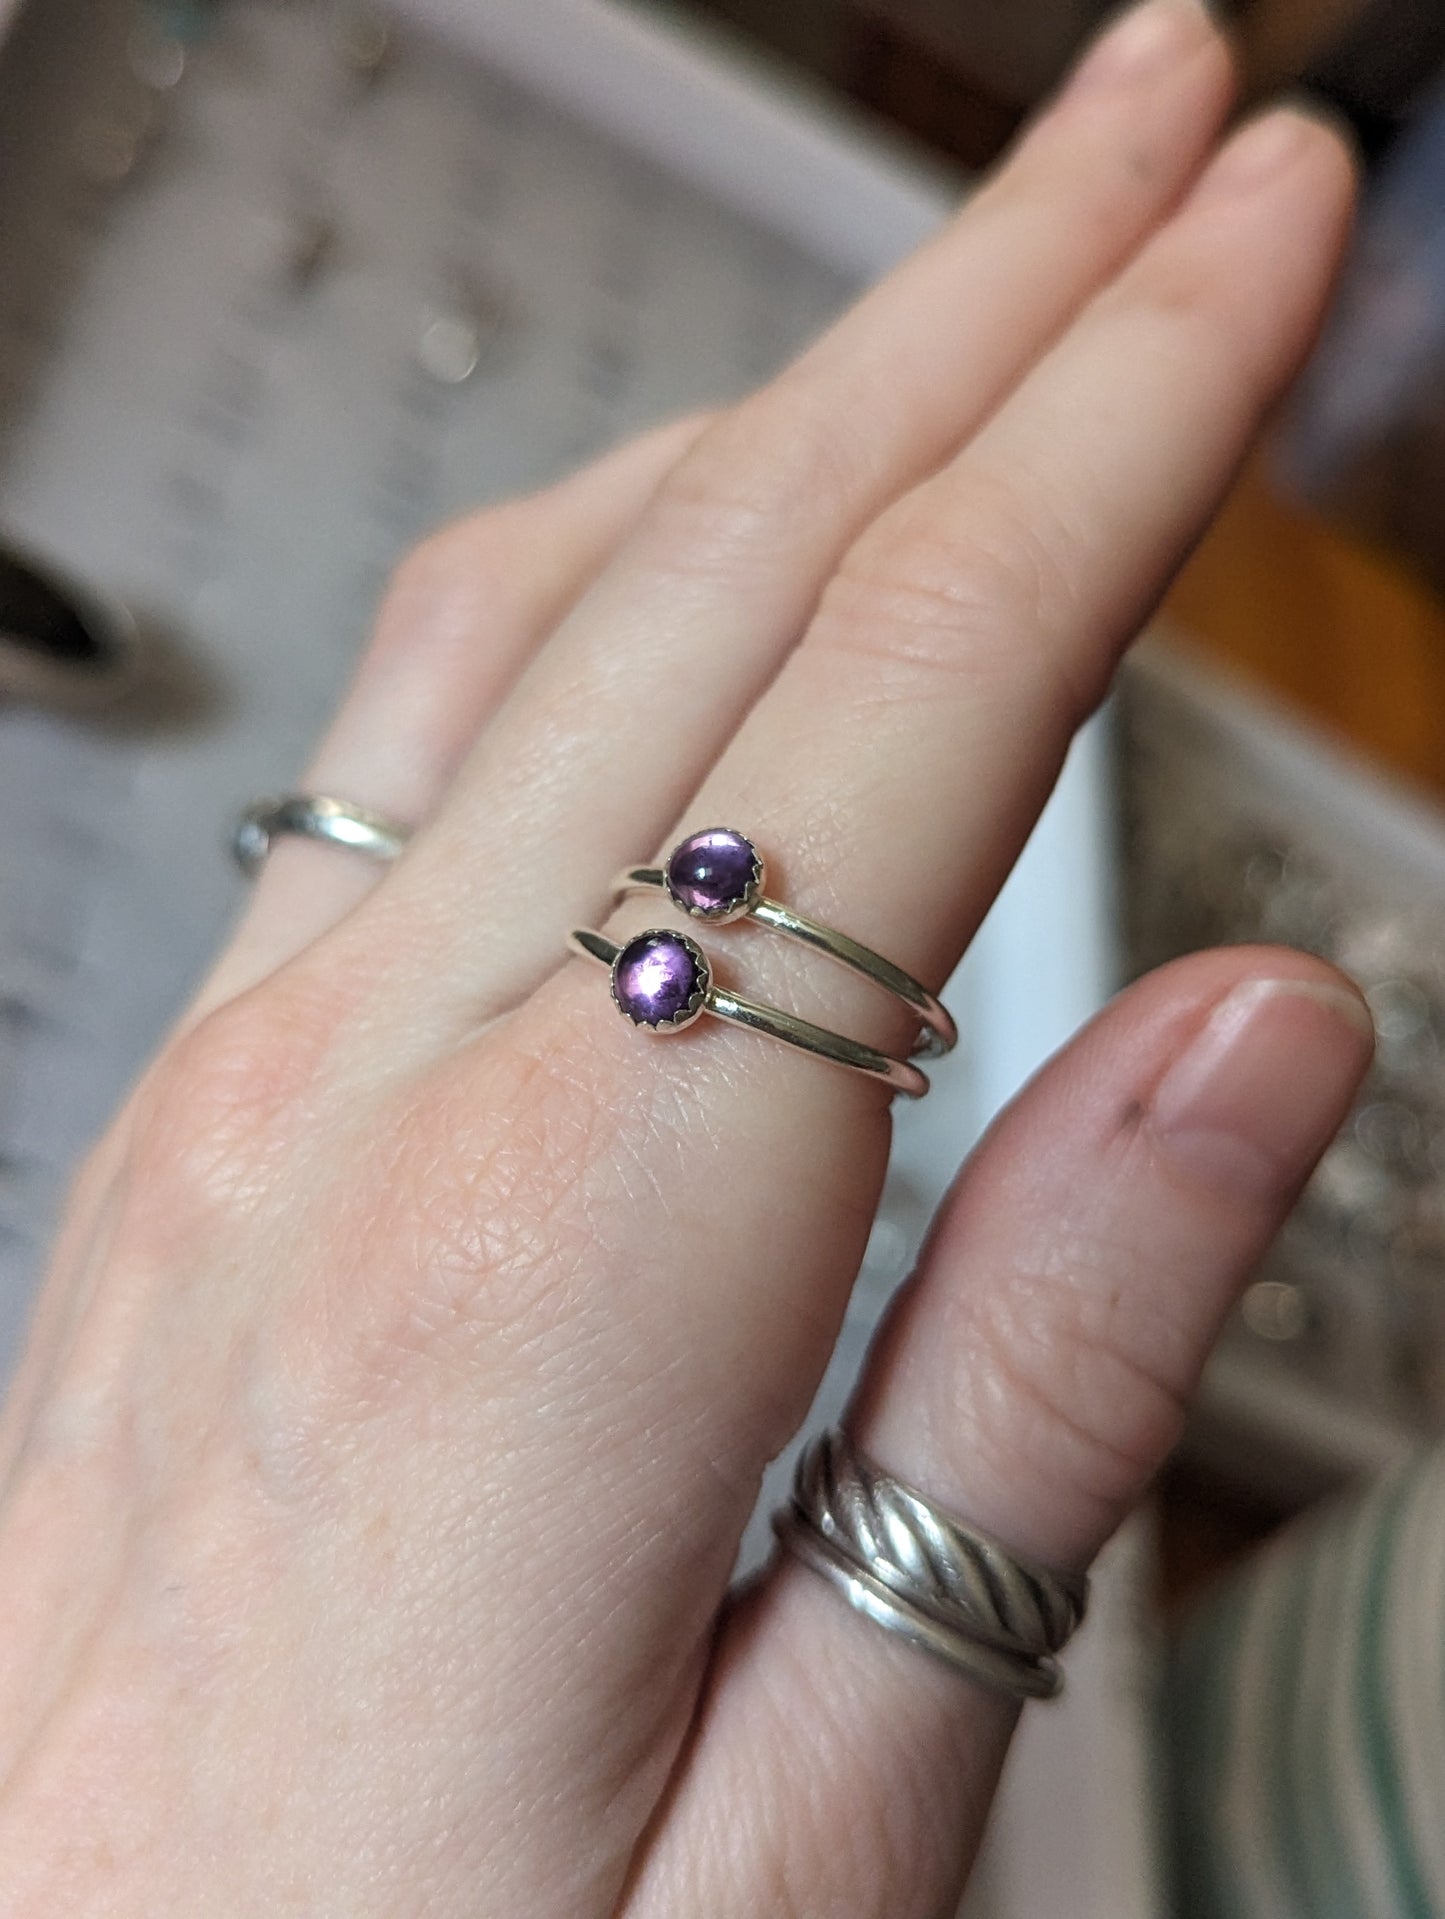 5mm Amethyst Sterling Silver Ring (various sizes available MTO)